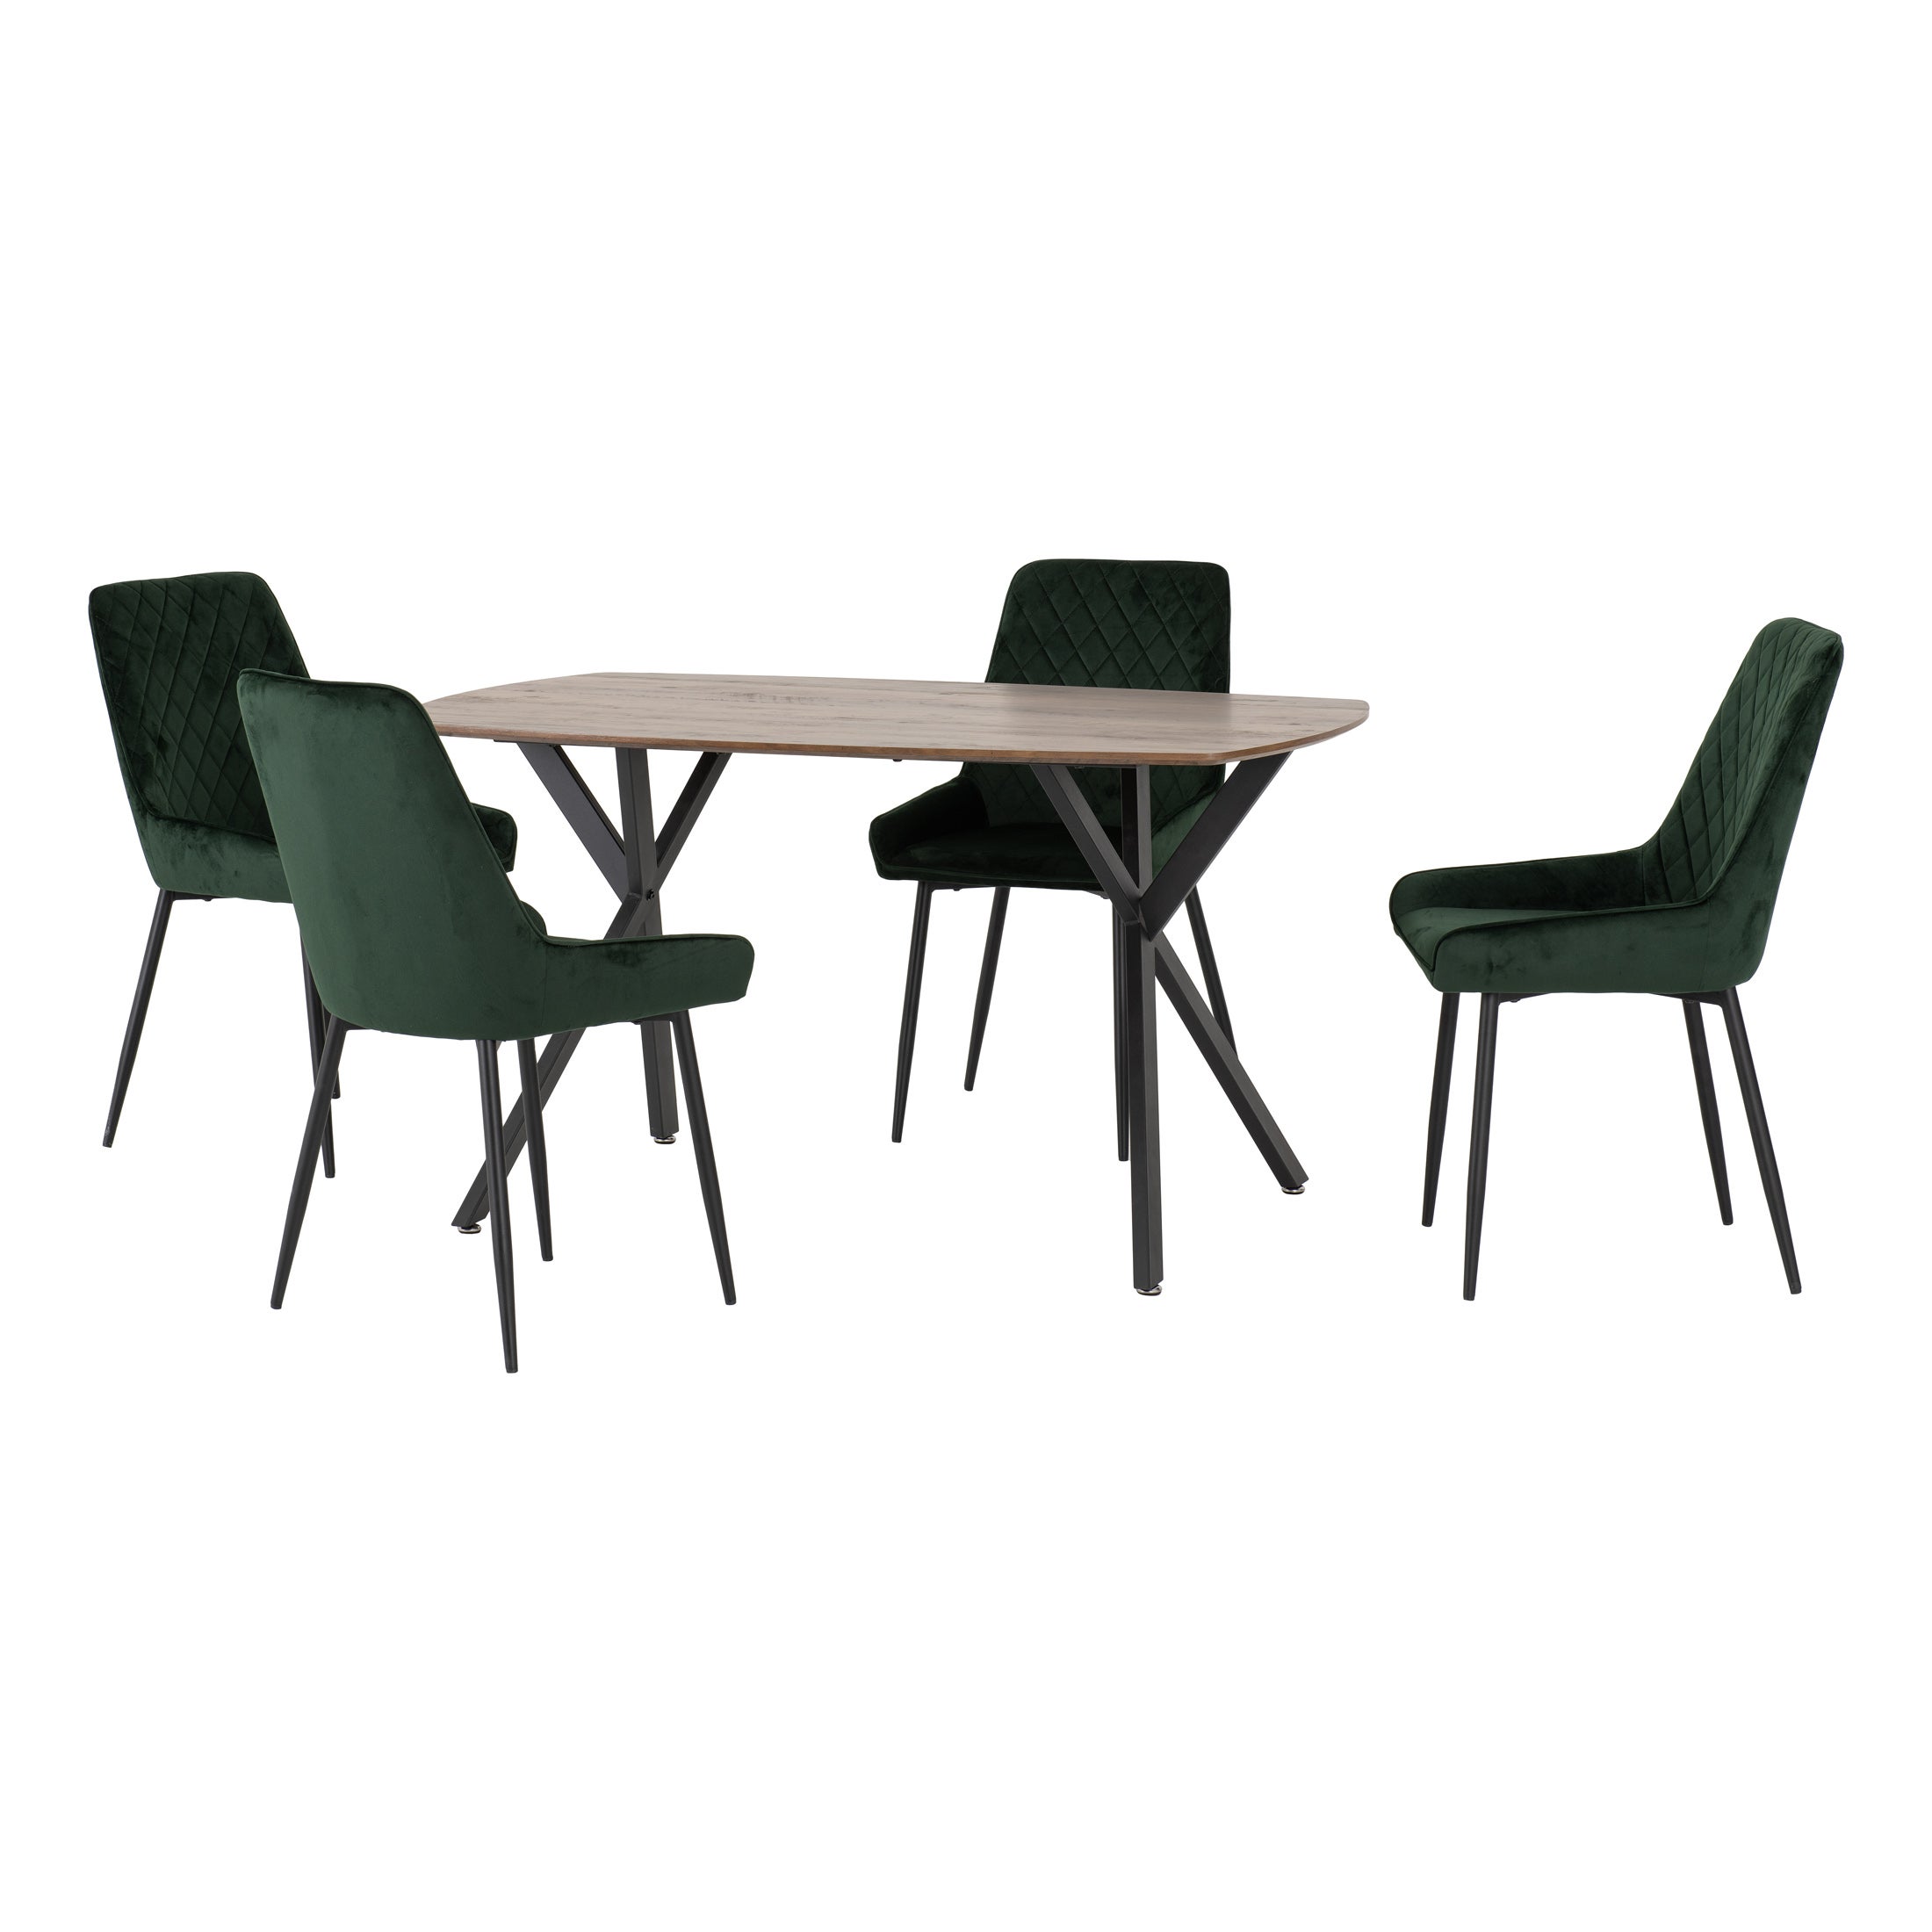 Athens Rectangular Dining Table with 4 Avery Chairs, Oak Effect Green